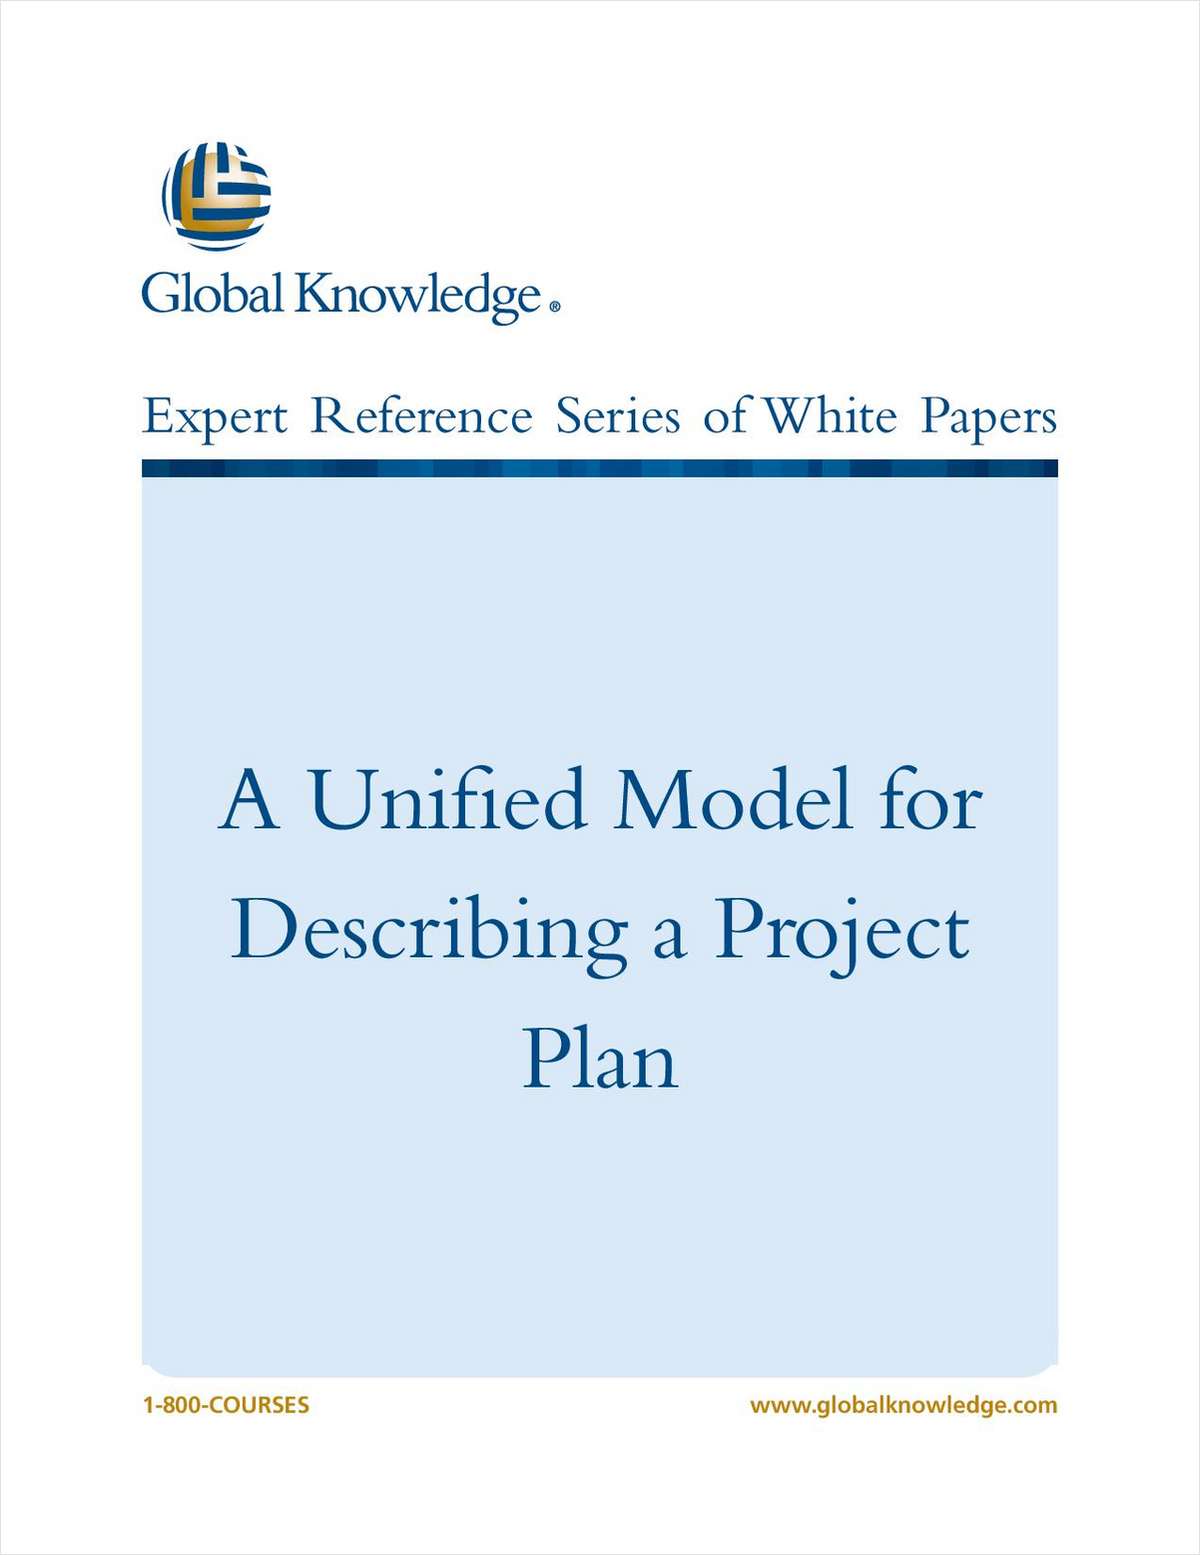 A Unified Model for Describing a Project Plan